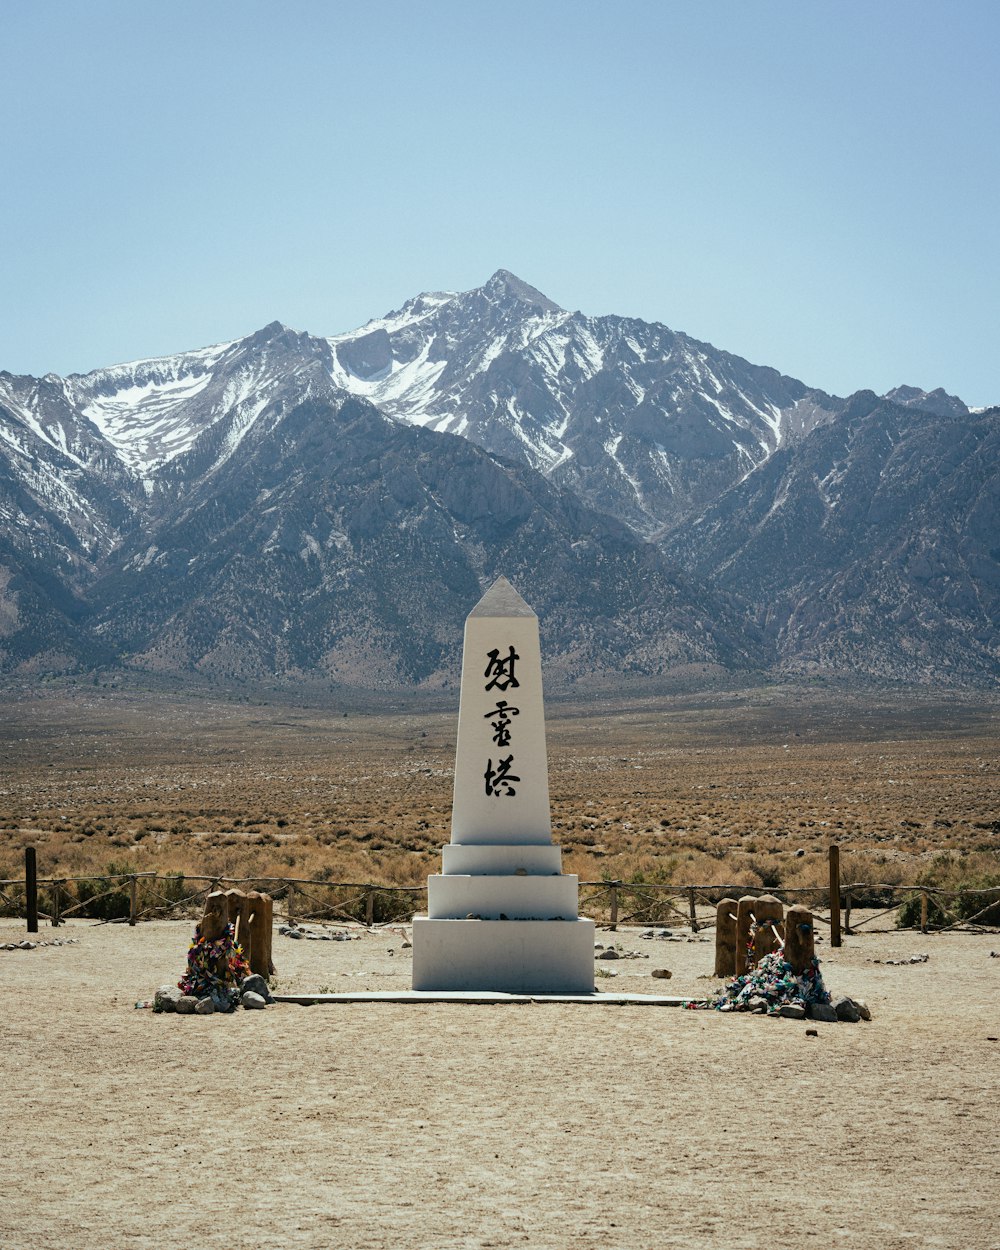 a white cylindrical object with a black text on it in front of a mountain range